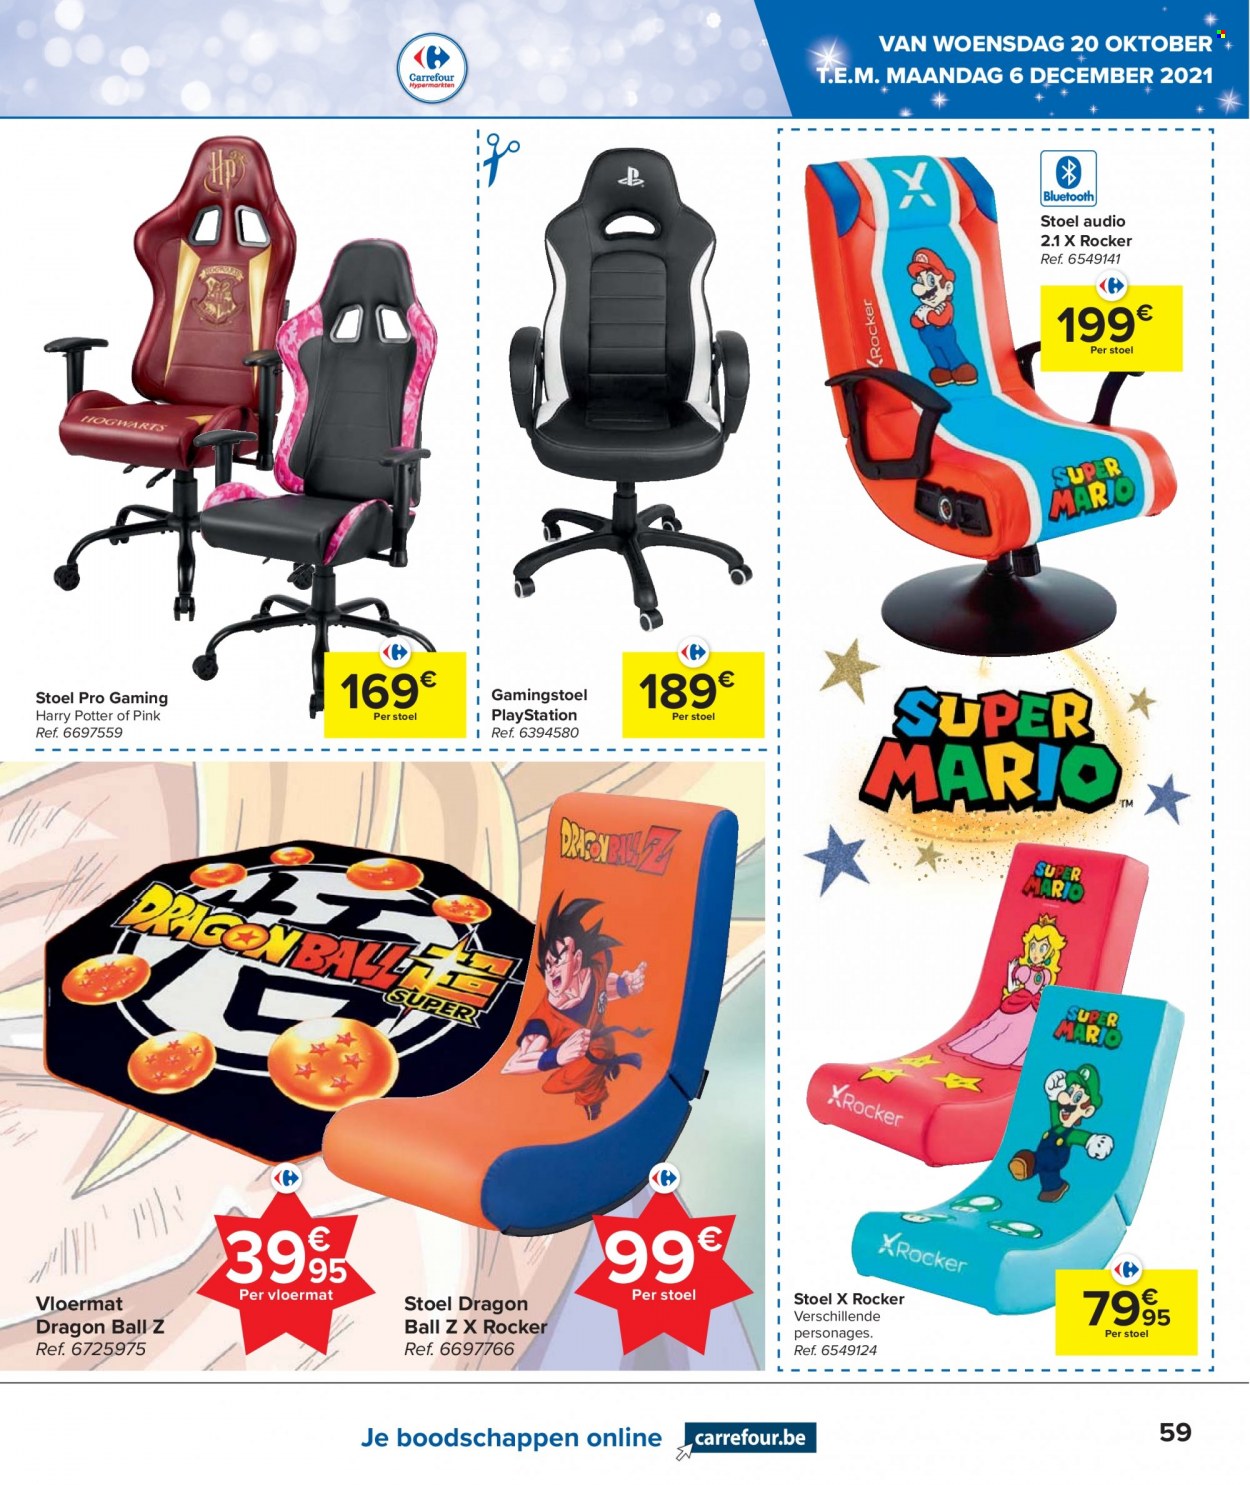 Catalogue Carrefour hypermarkt - 20.10.2021 - 6.12.2021. Page 59.